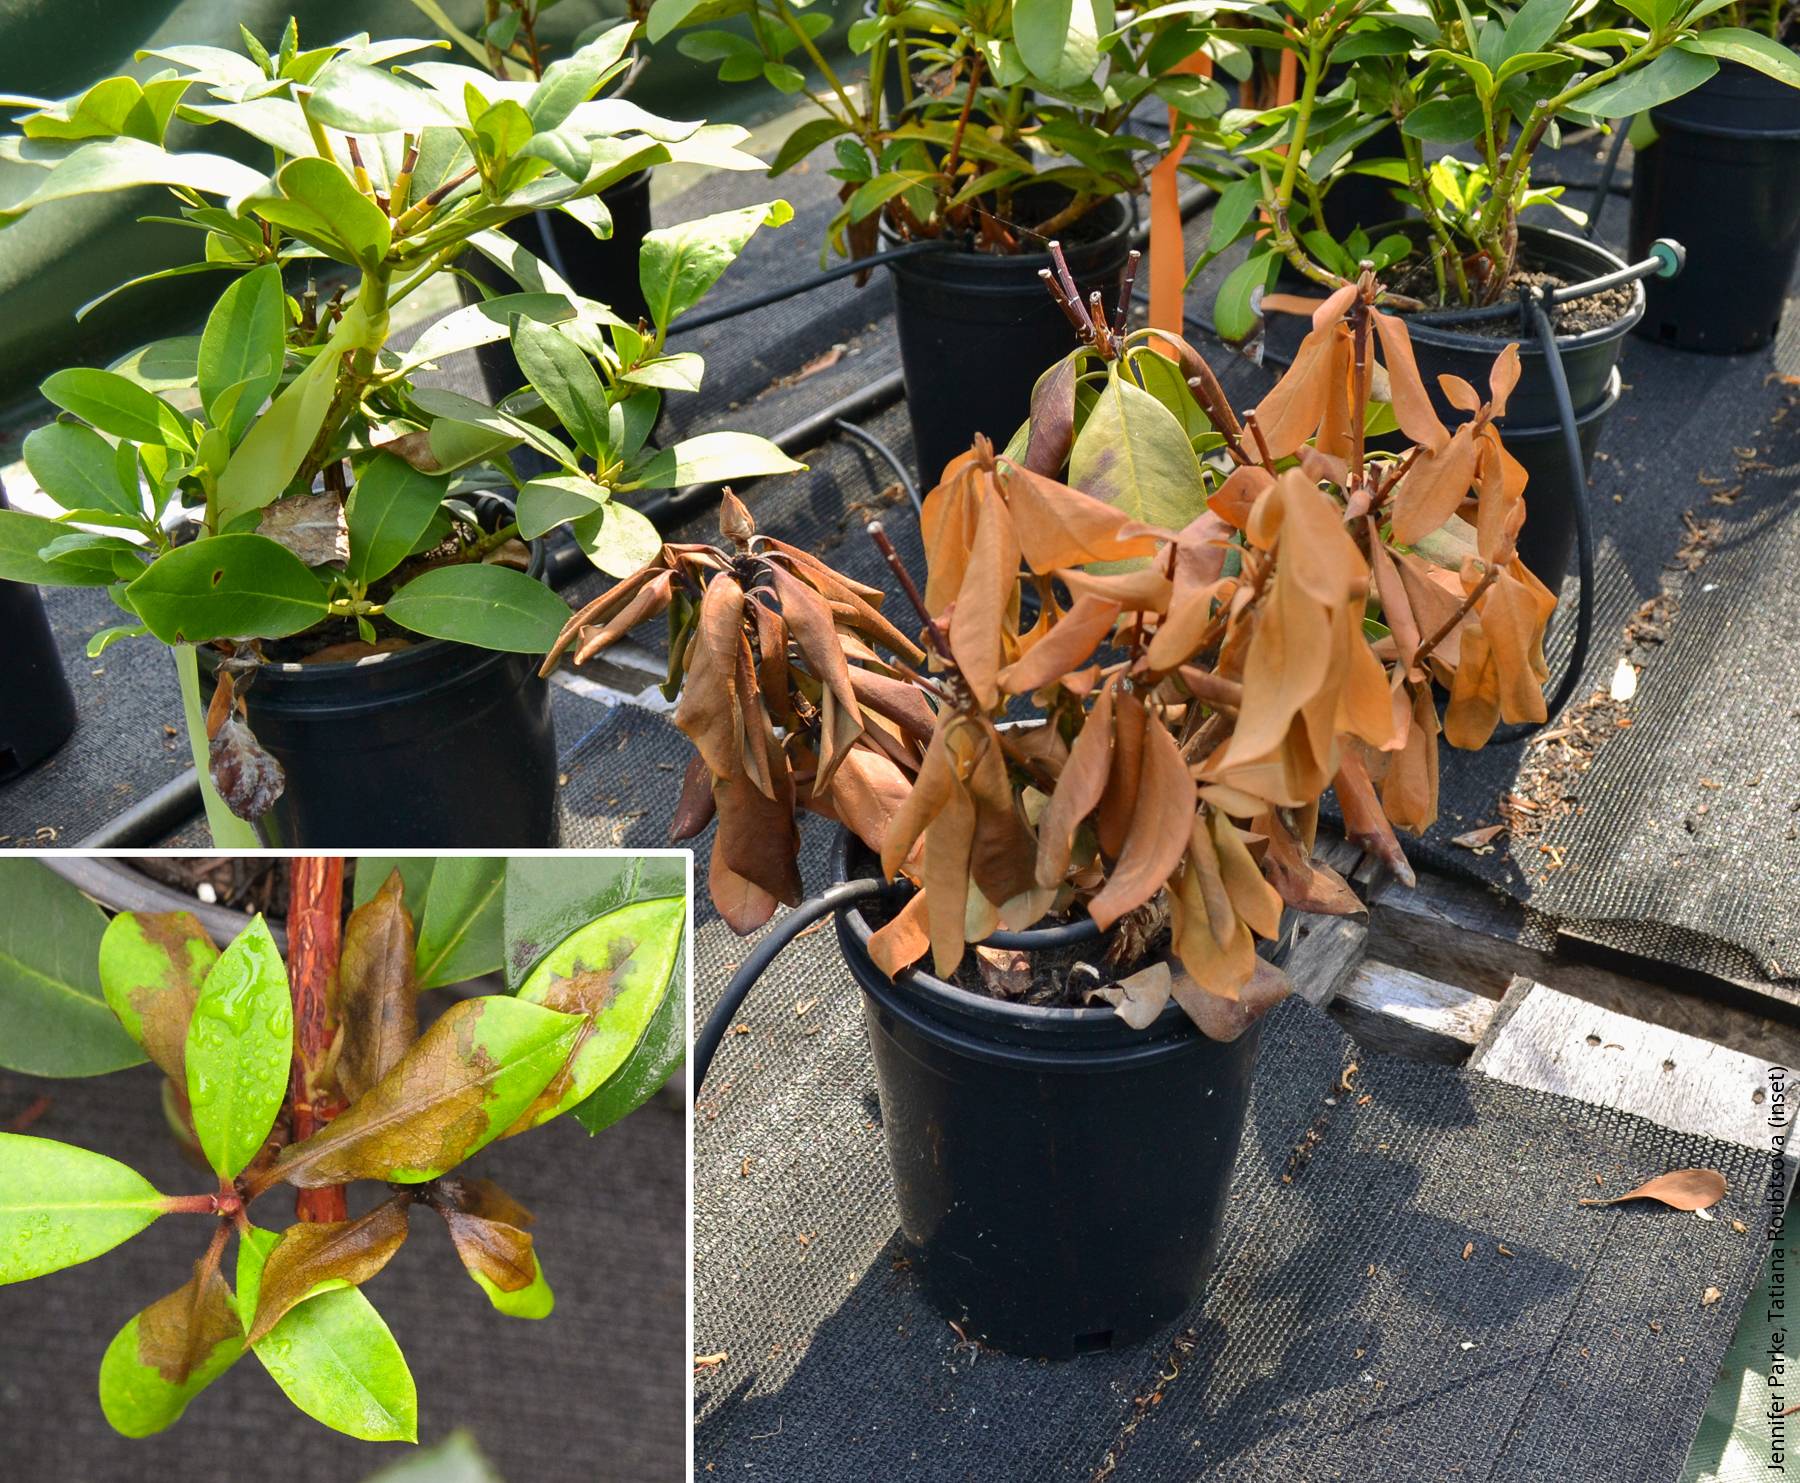 Rhododendron plants declining from ramorum blight caused by Phytophthora ramorum in a commercial nursery. Inset, leaf symptoms of ramorum blight on Rhododendron.